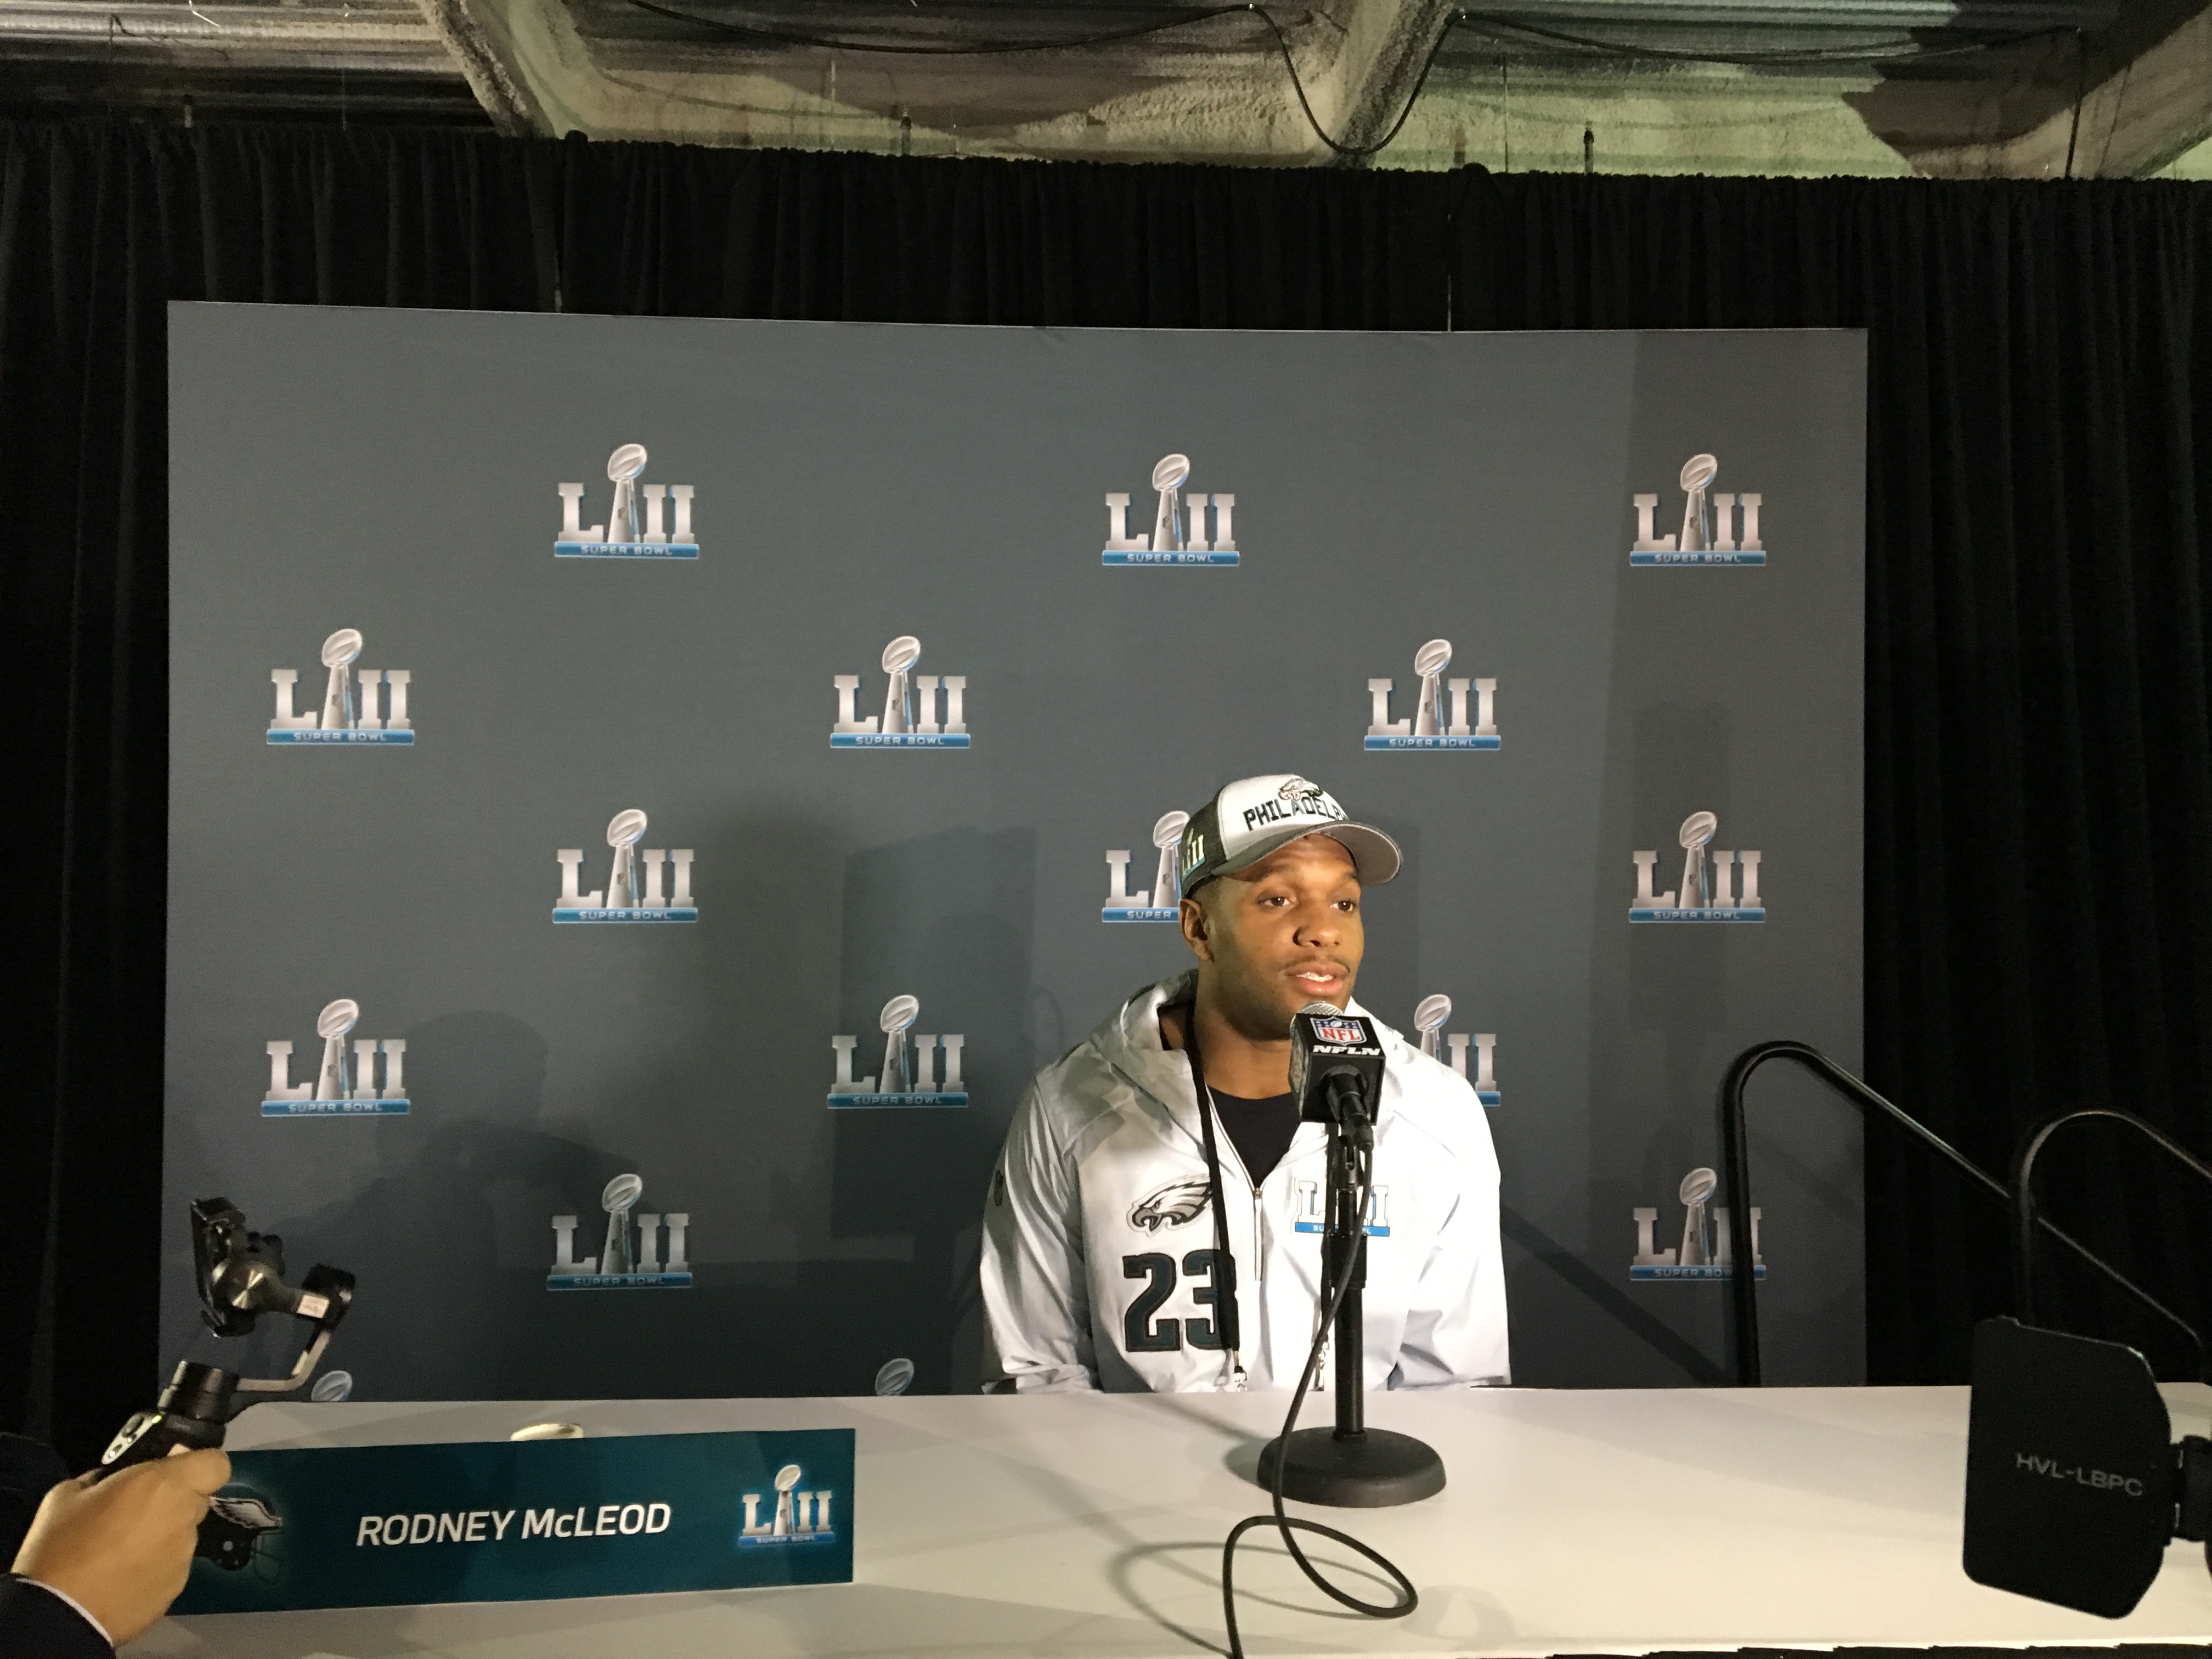 Rodney McLeod, the Philadelphia Eagles starting safety, was a standout player at DeMatha Catholic High School in Hyattsville, Maryland. He told reporters at the Super Bowl Opening Night event Monday that the culture at DeMatha taught him that “Hard work does pay off.” Capital News Service photo by Kyle Melnick.